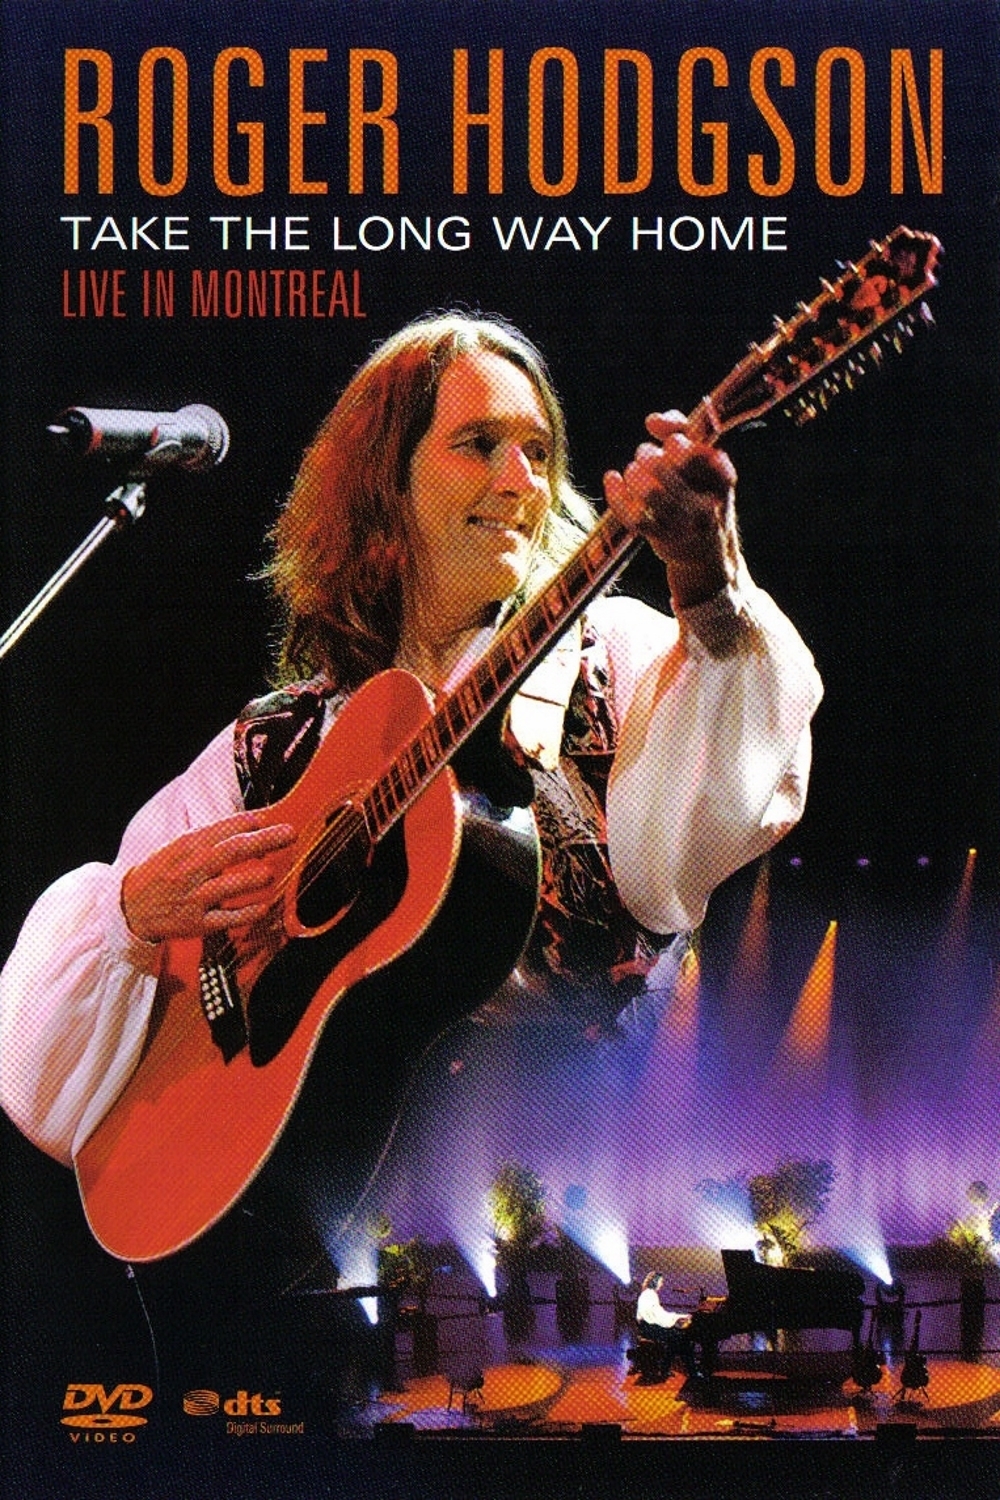 affiche du film Roger Hodgson: Take the Long Way Home (Live in Montreal)